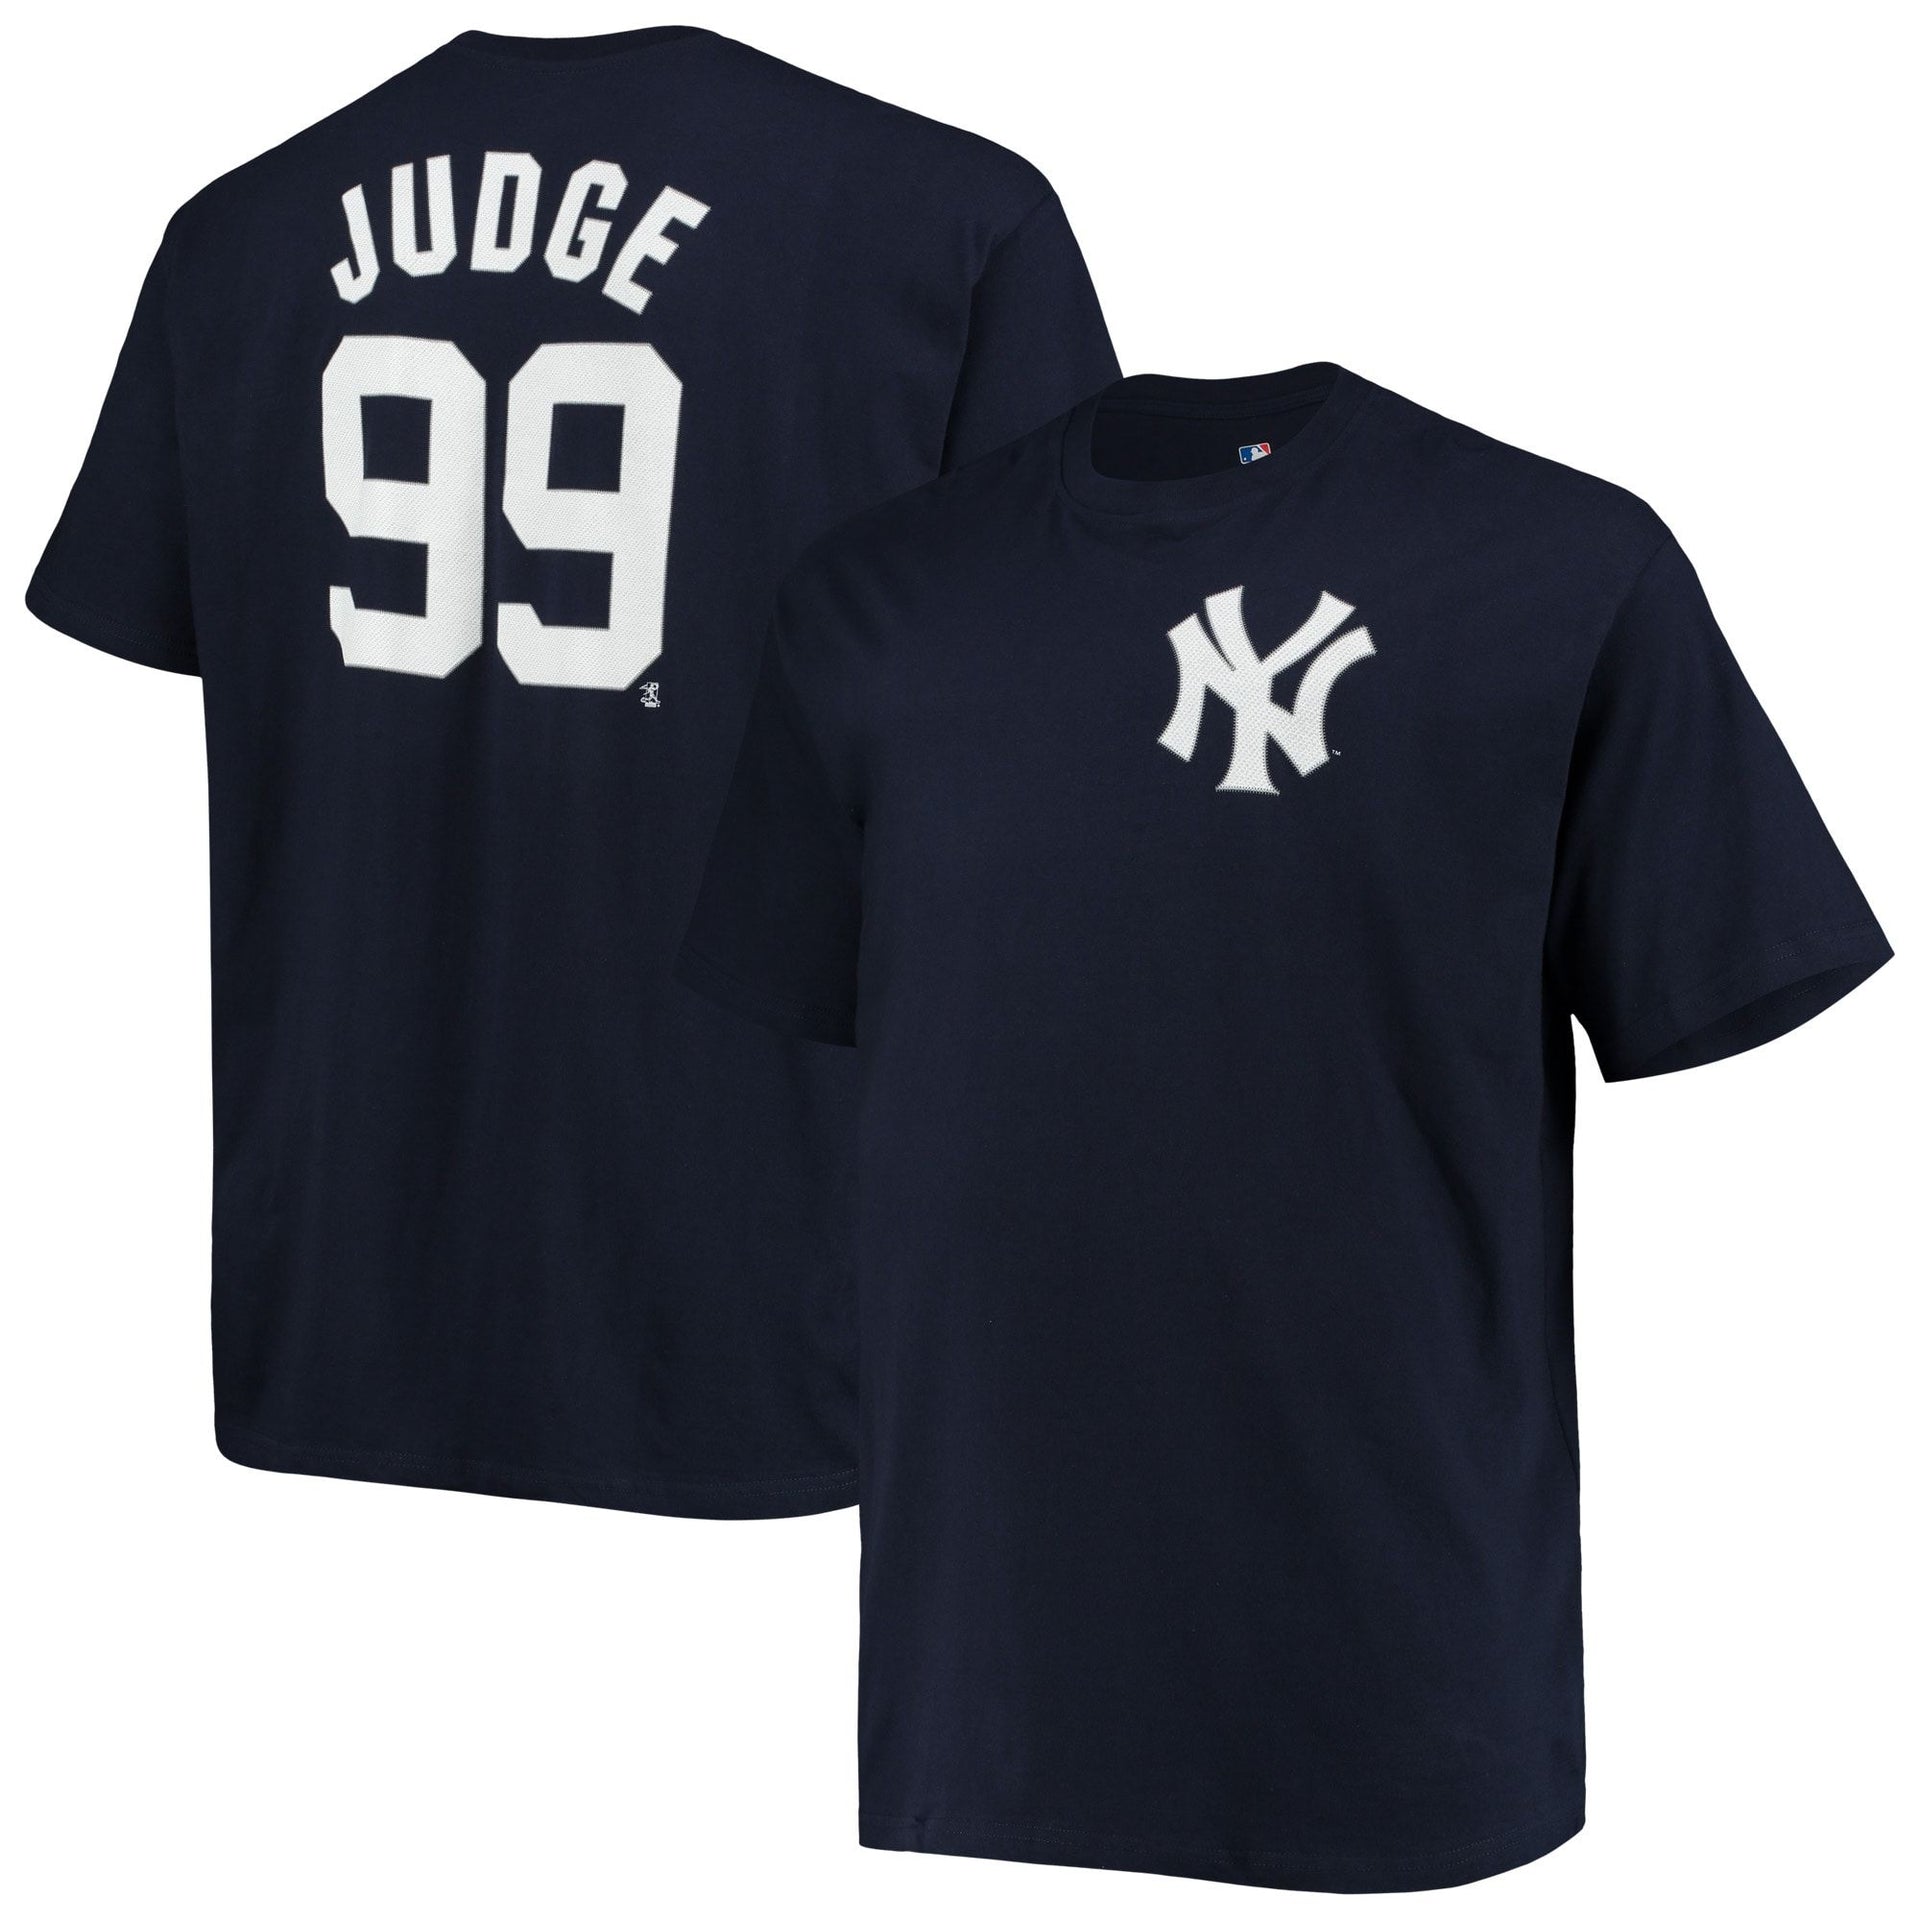 Aaron Judge New York Yankees Majestic Adult Name & Number T-Shirt - Dynasty Sports & Framing 